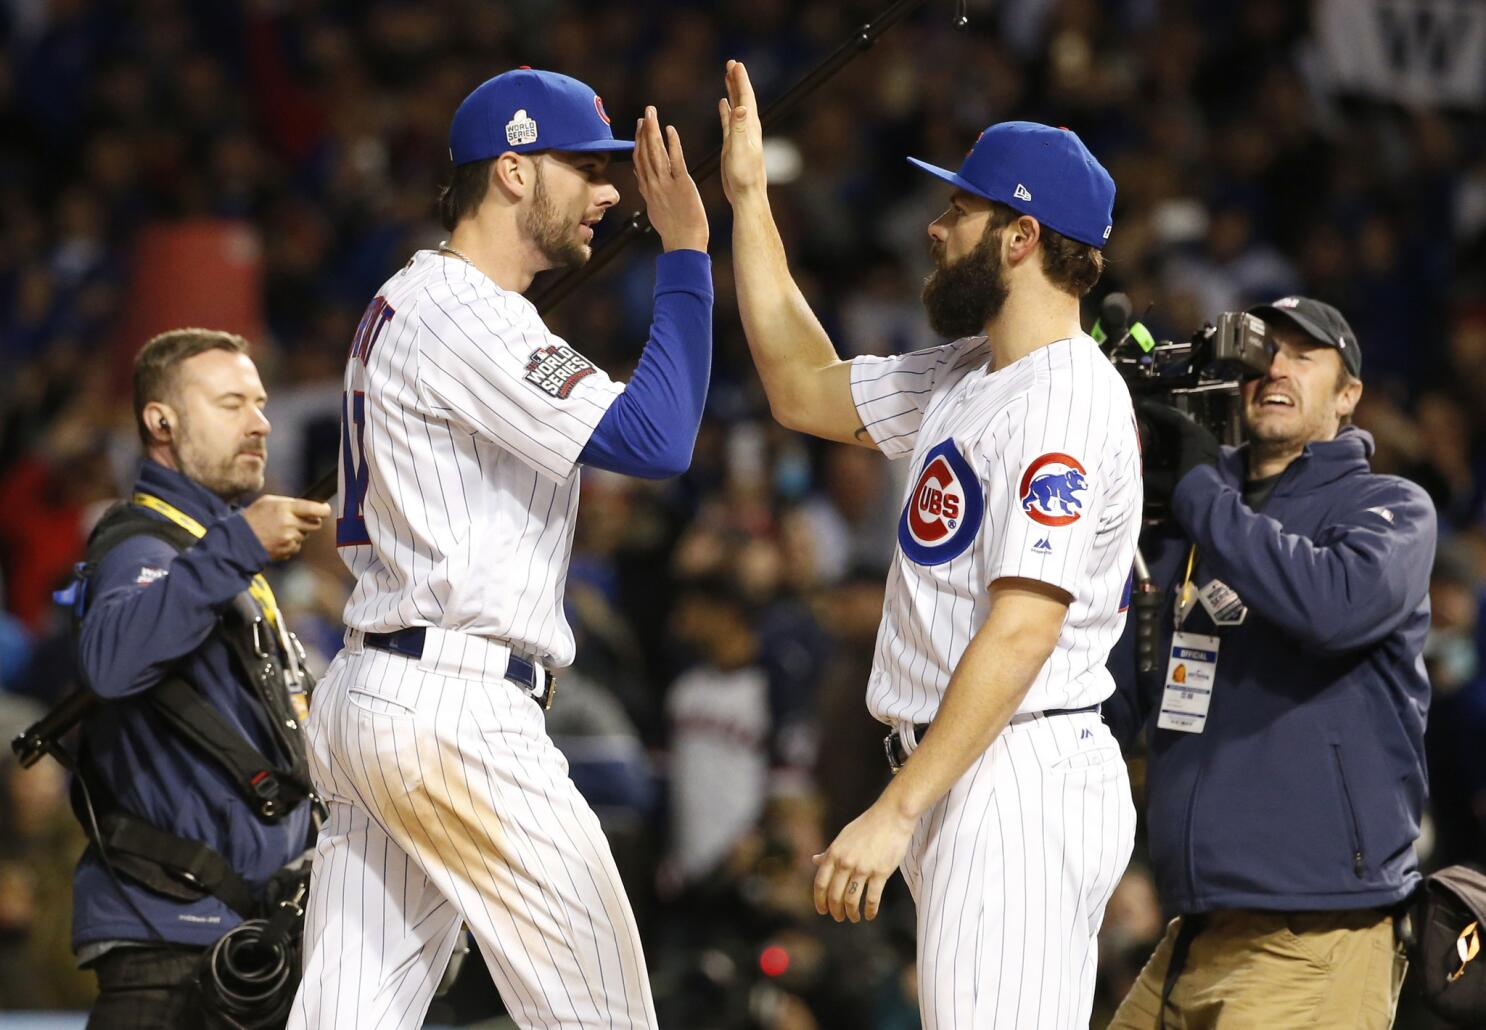 Arrieta celebrates no-no at Wrigley with gifts from Cubs, Dodgers